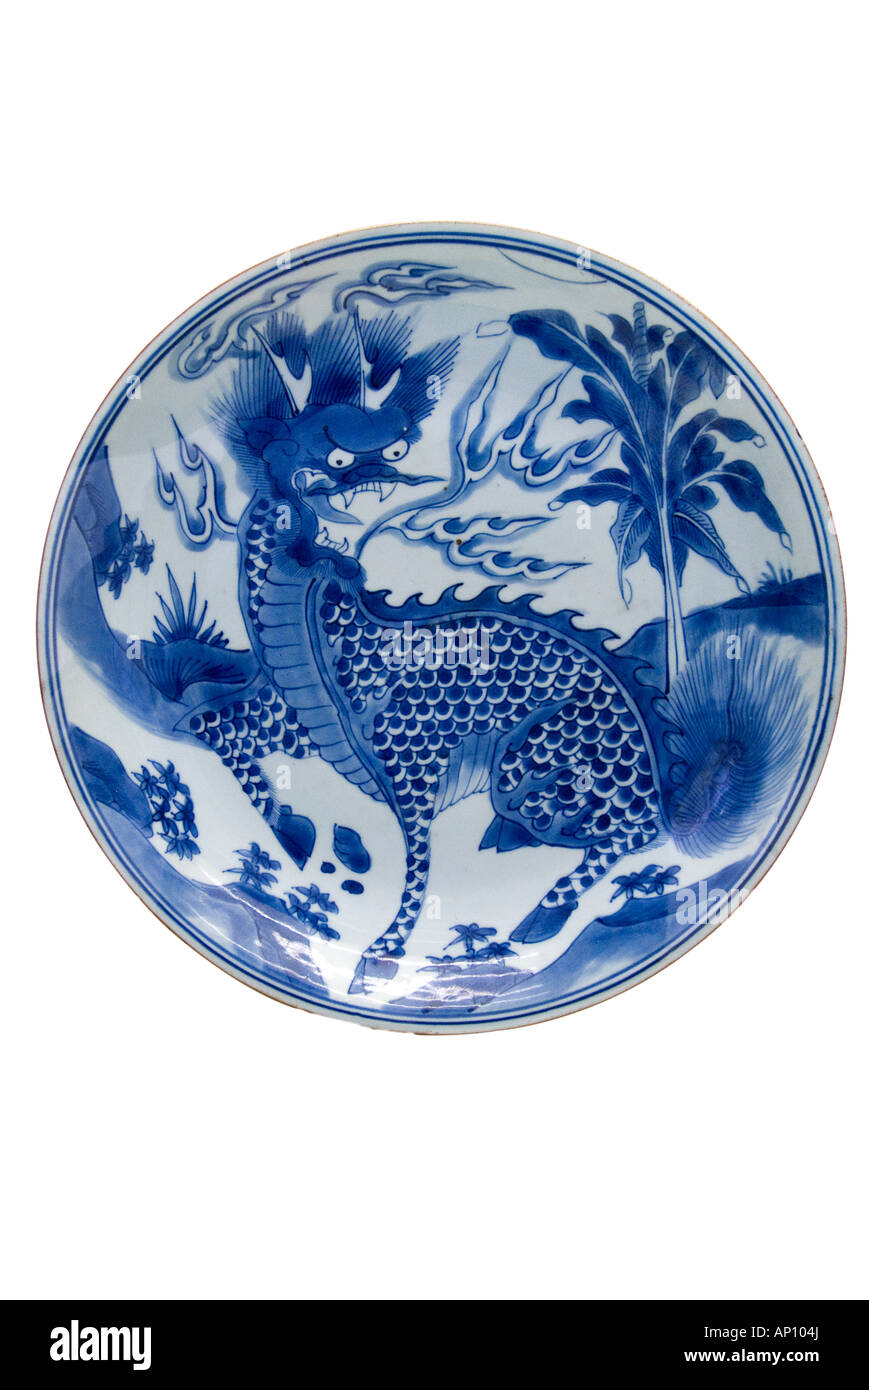 dragon plate Chinese mythical beast fierce scaled fire flame breath fang teeth blue floral design export porcelain family kiln g Stock Photo